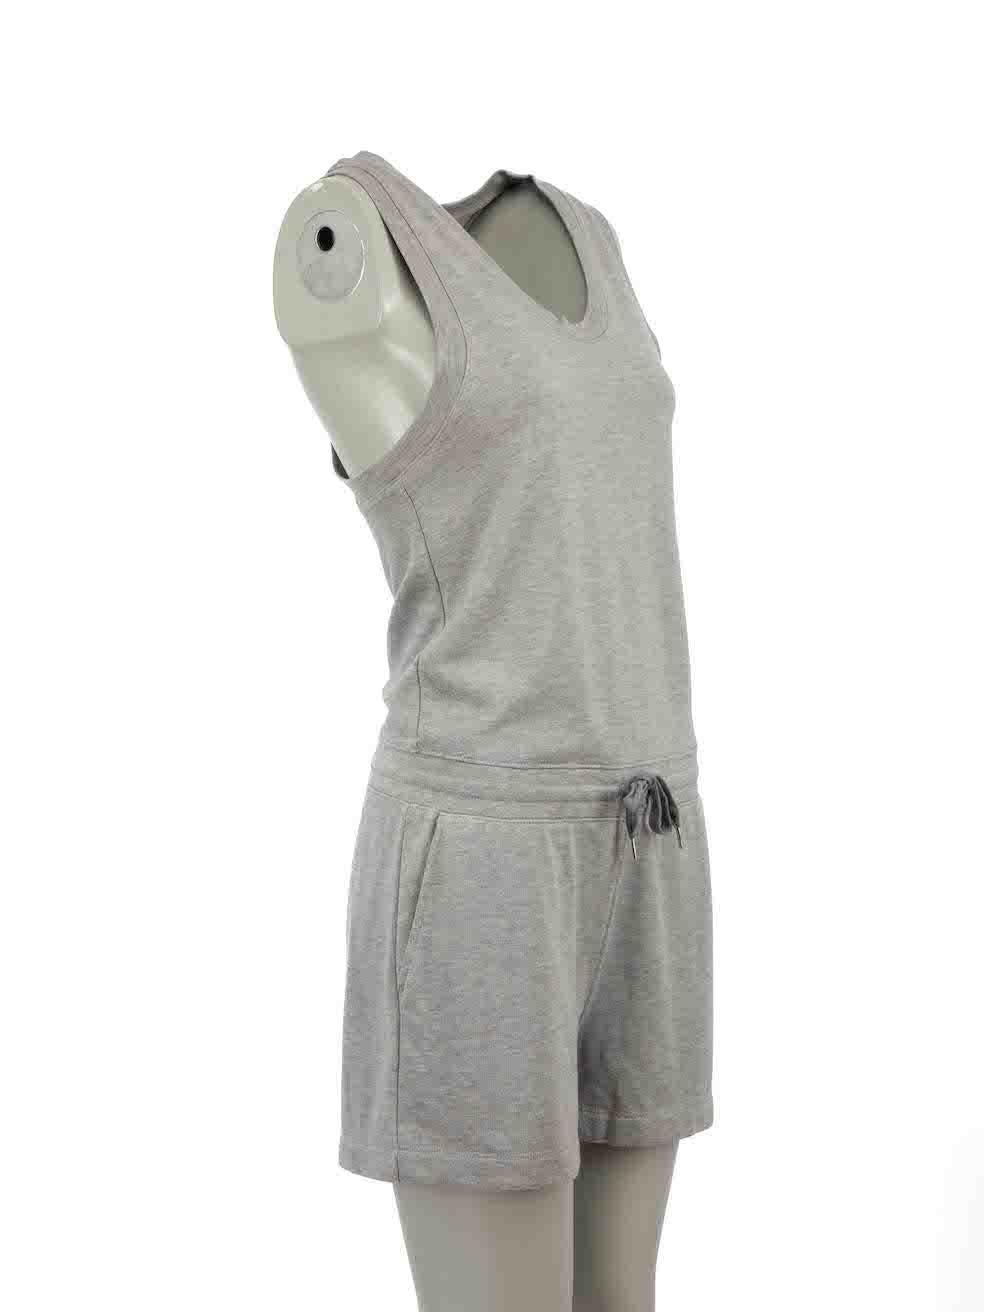 CONDITION is Very good. Hardly any visible wear to playsuit is evident on this used T Alexander Wang designer resale item.
 
Details
Grey
Polyester
Sleeveless playsuit
Stretchy
Scoop neckline
Drawstring on waistline
2x Front side pockets
 
Made in